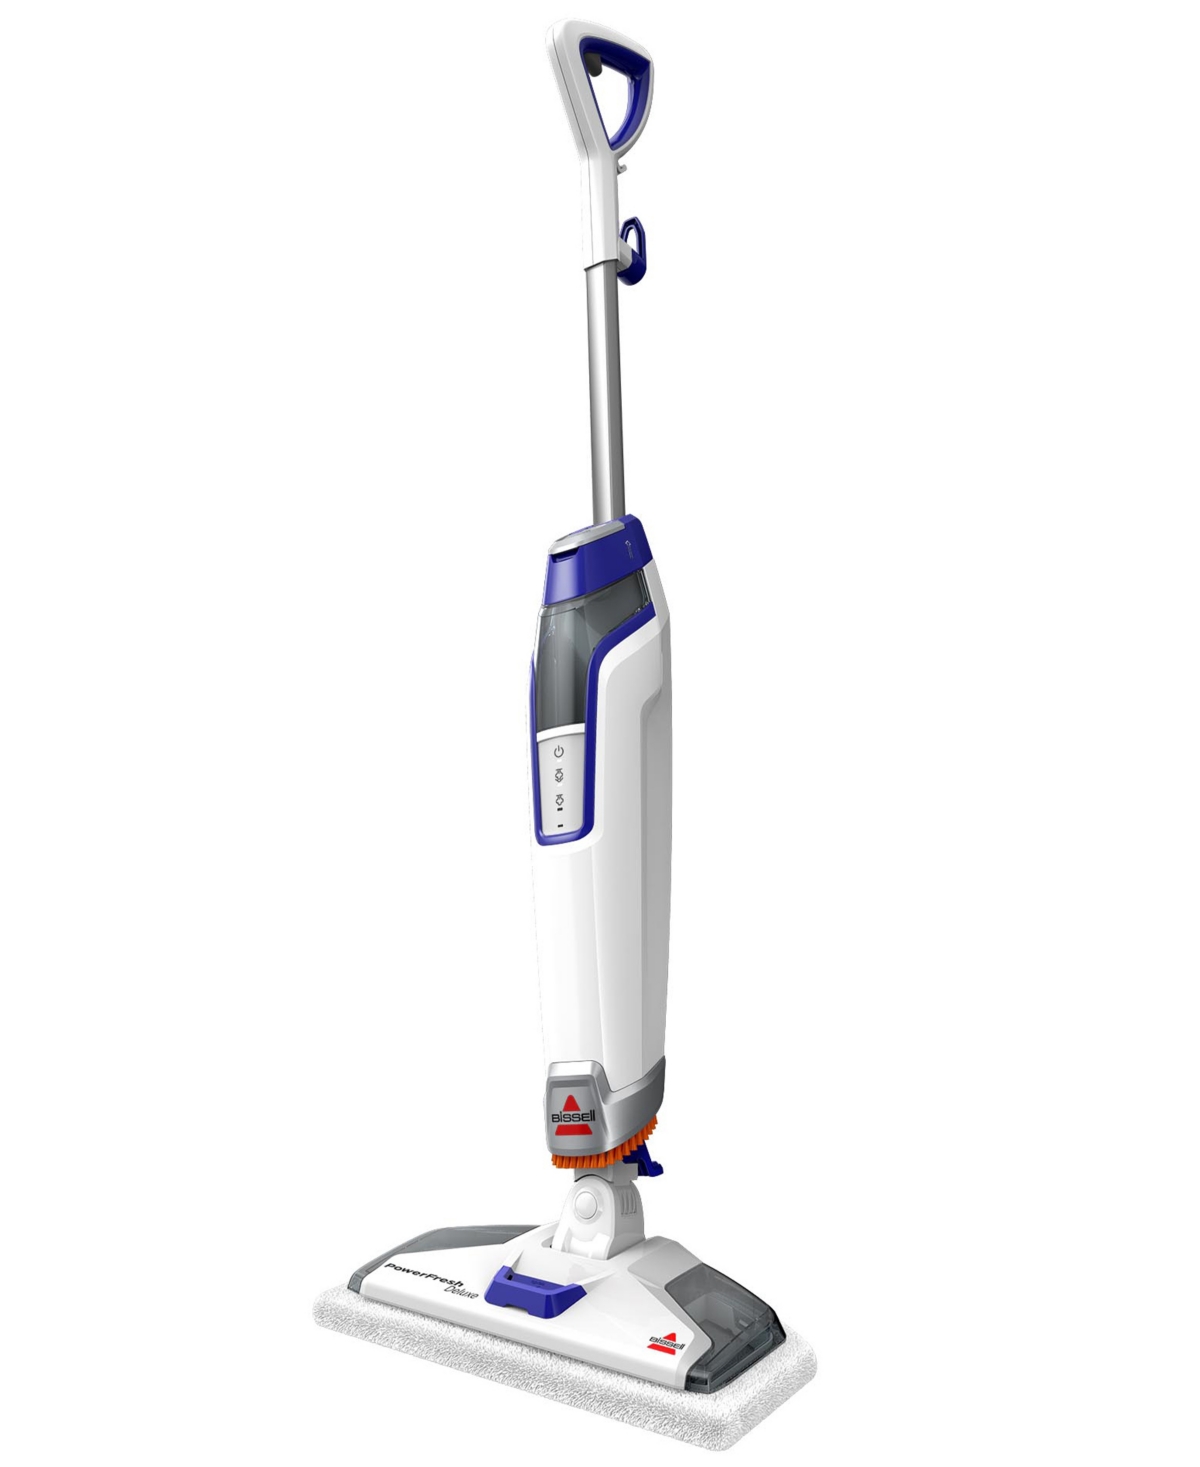 Bissell Spotclean Pro Portable Carpet Cleaner - Macy's